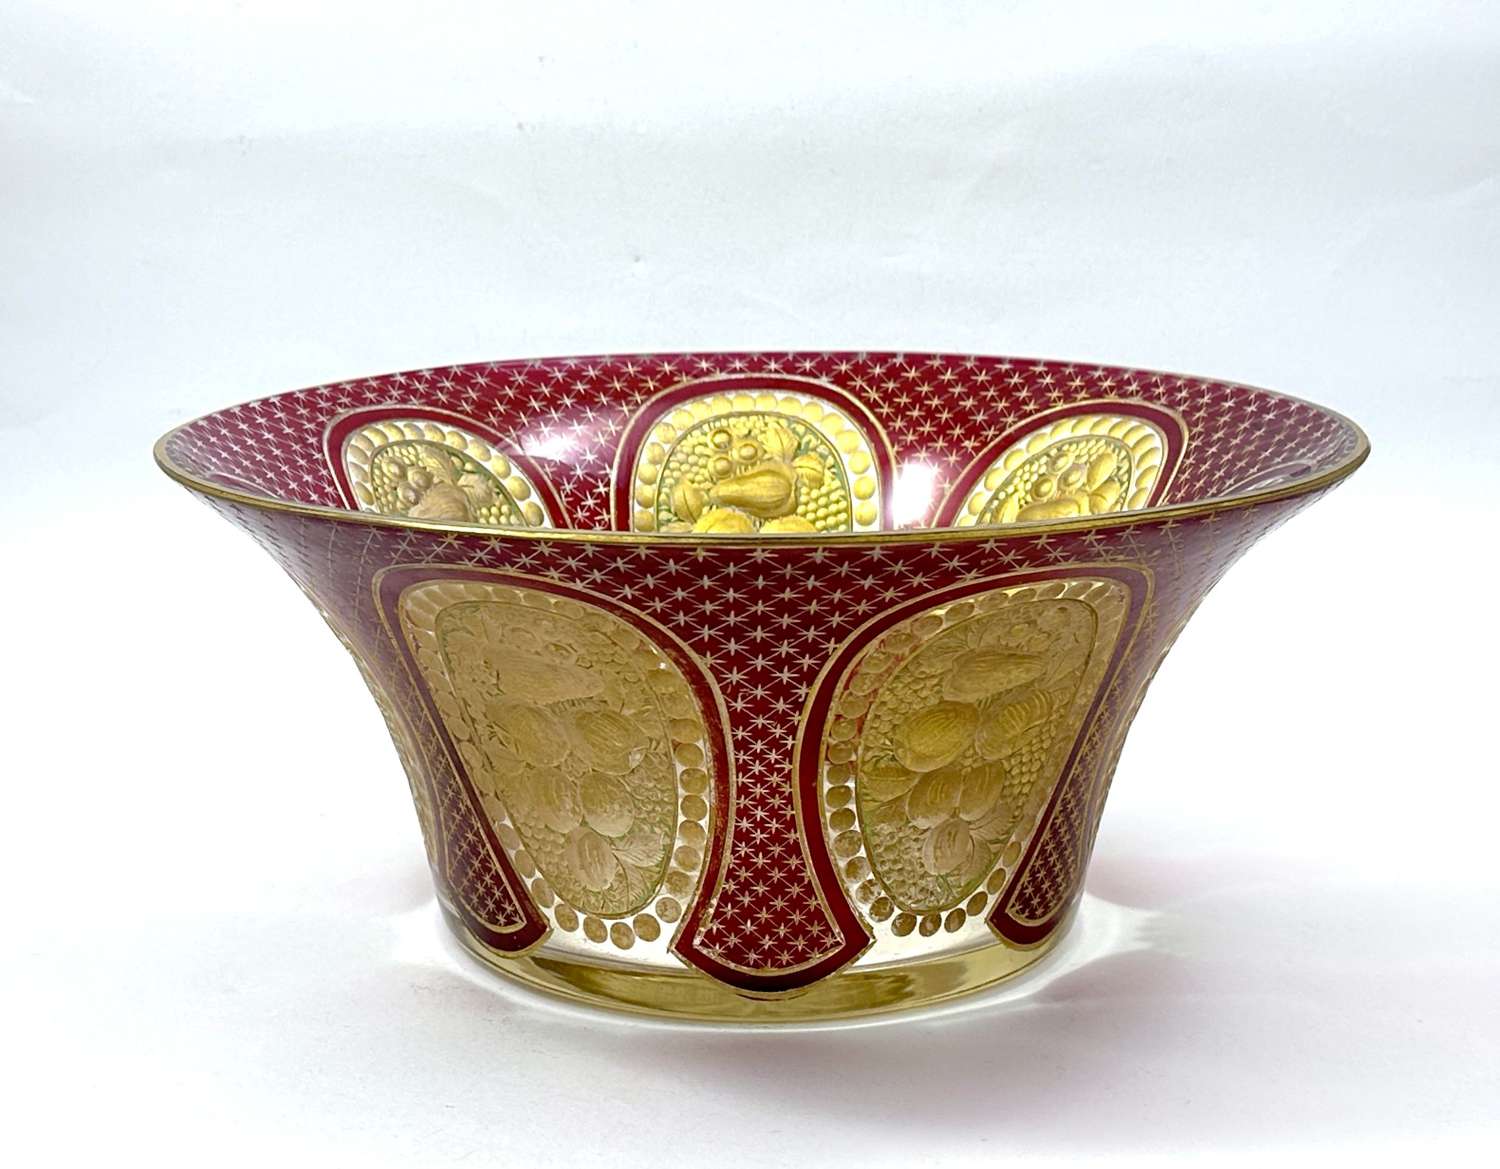 A Superb Large Antique High Quality MOSER Red and Gold Bowl.